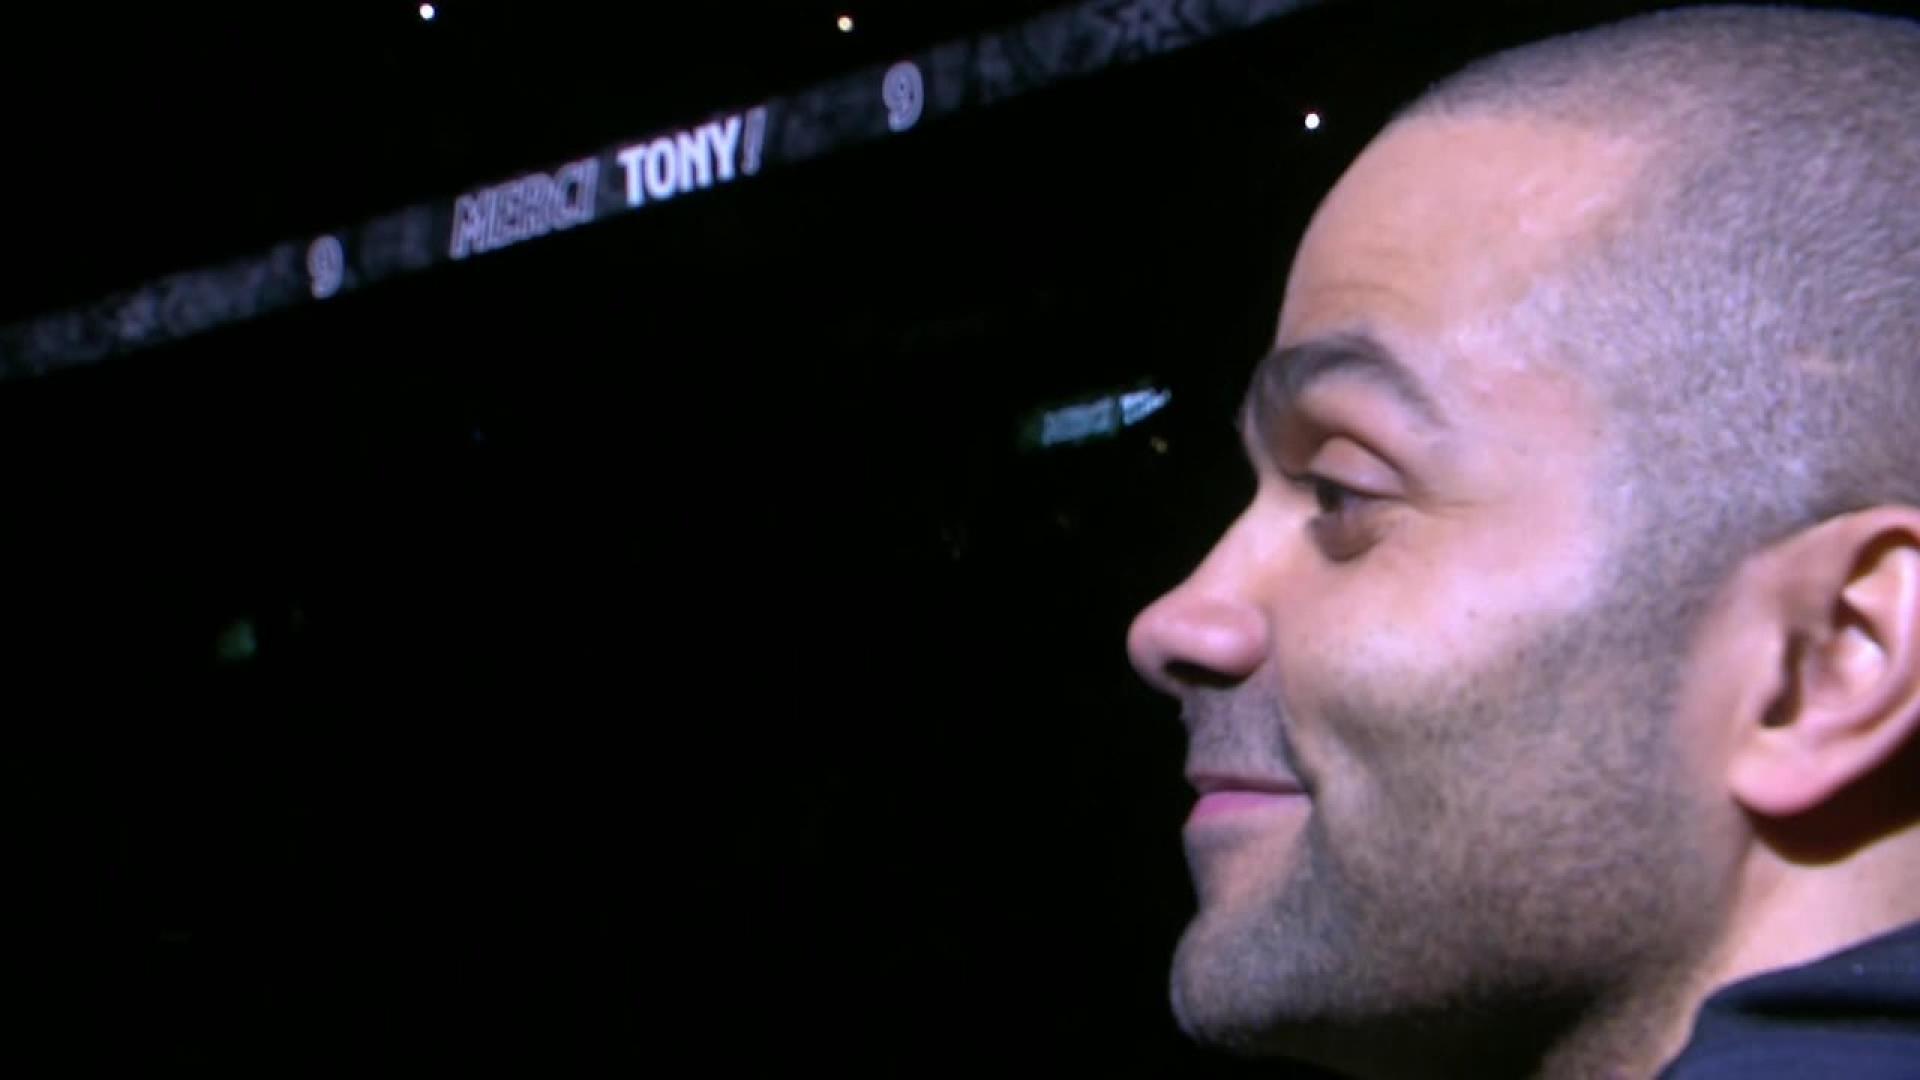 Spurs Pay Tribute To Tony Parker